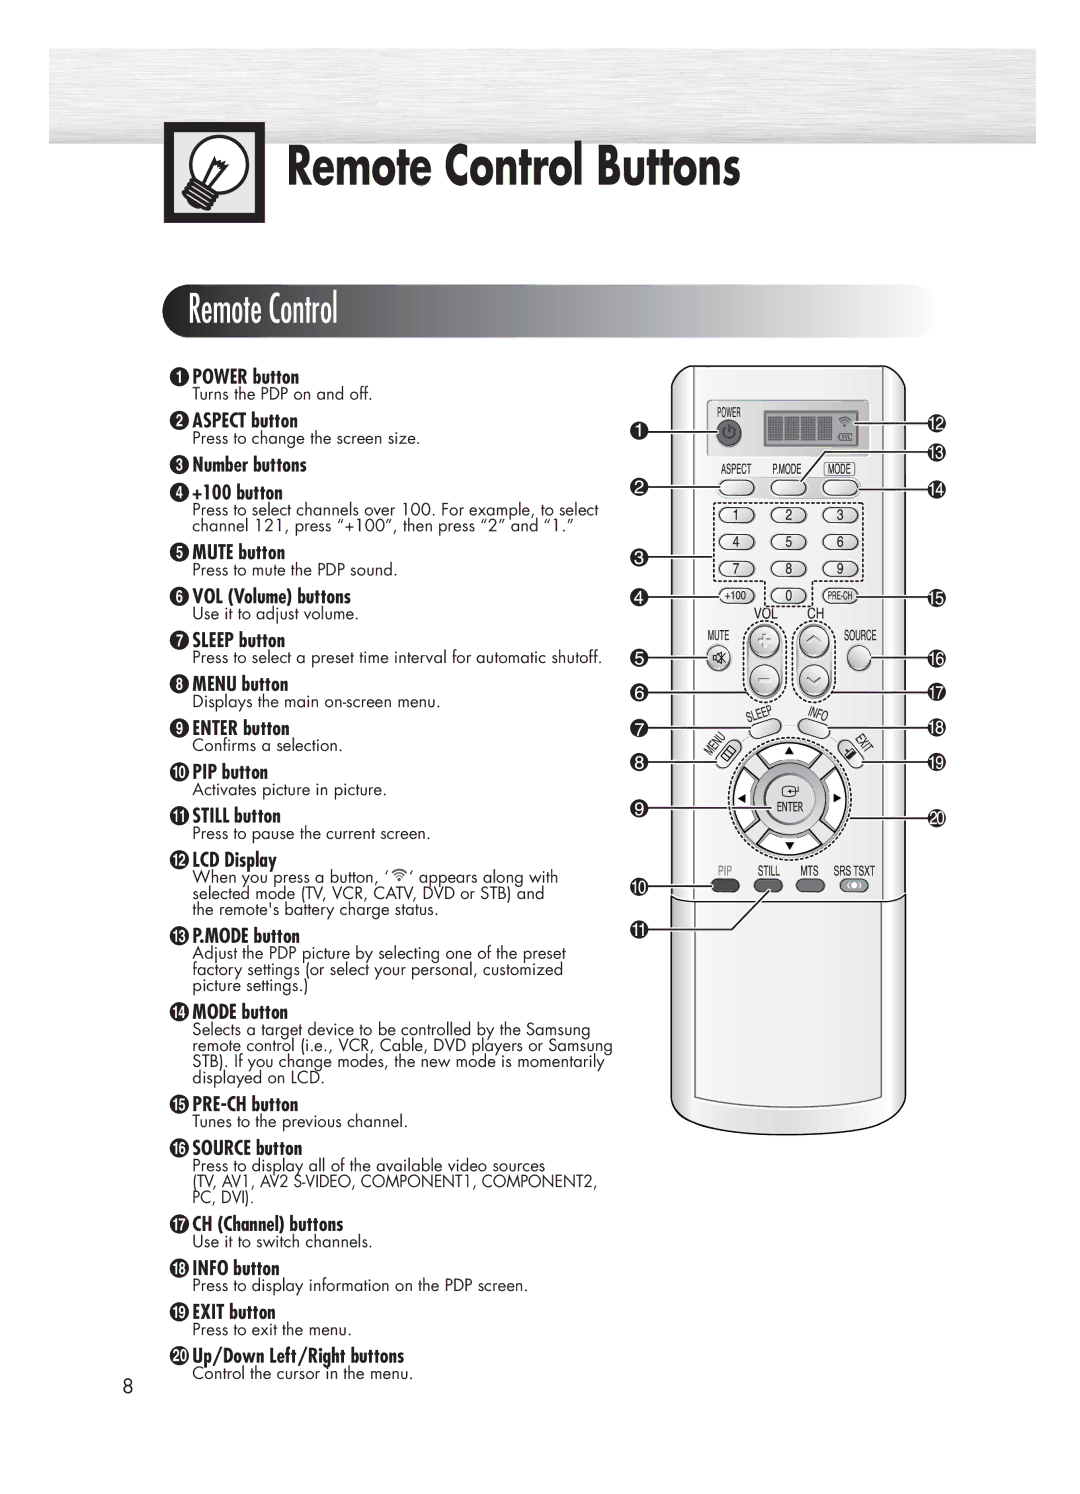 Samsung HP-P5031 manual Remote Control Buttons 